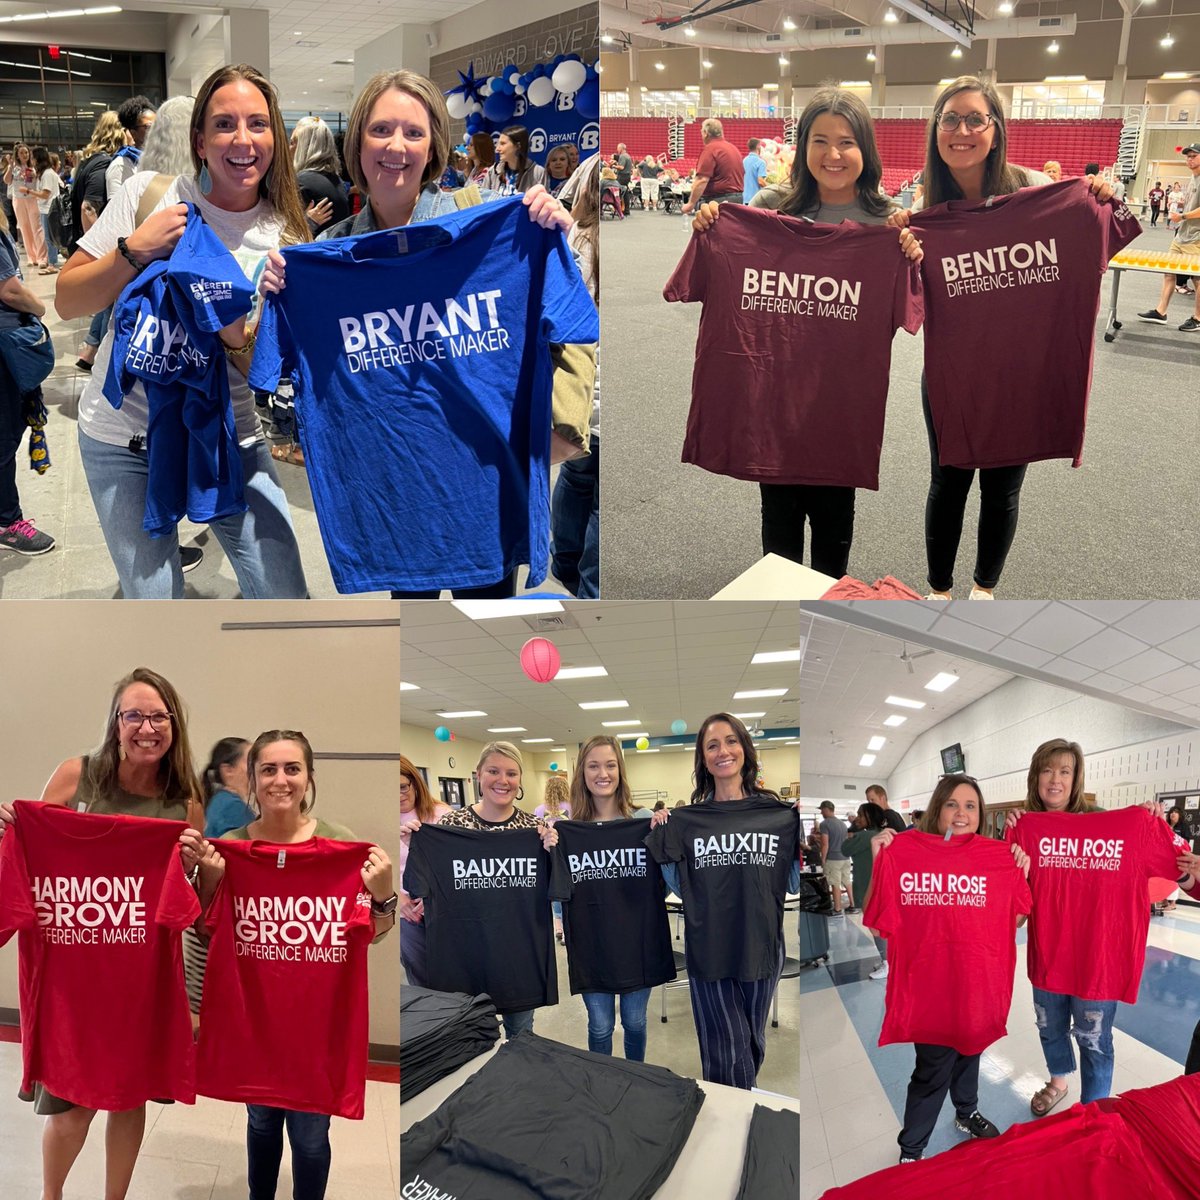 We had a great time visiting with Saline Co. schools & giving them new shirts for the school year. Our teachers are such a blessing, and we know our students are in the best hands with them. Thank you, teachers for all you do as #EverettDifferenceMakers! 
#EverettGoodNews